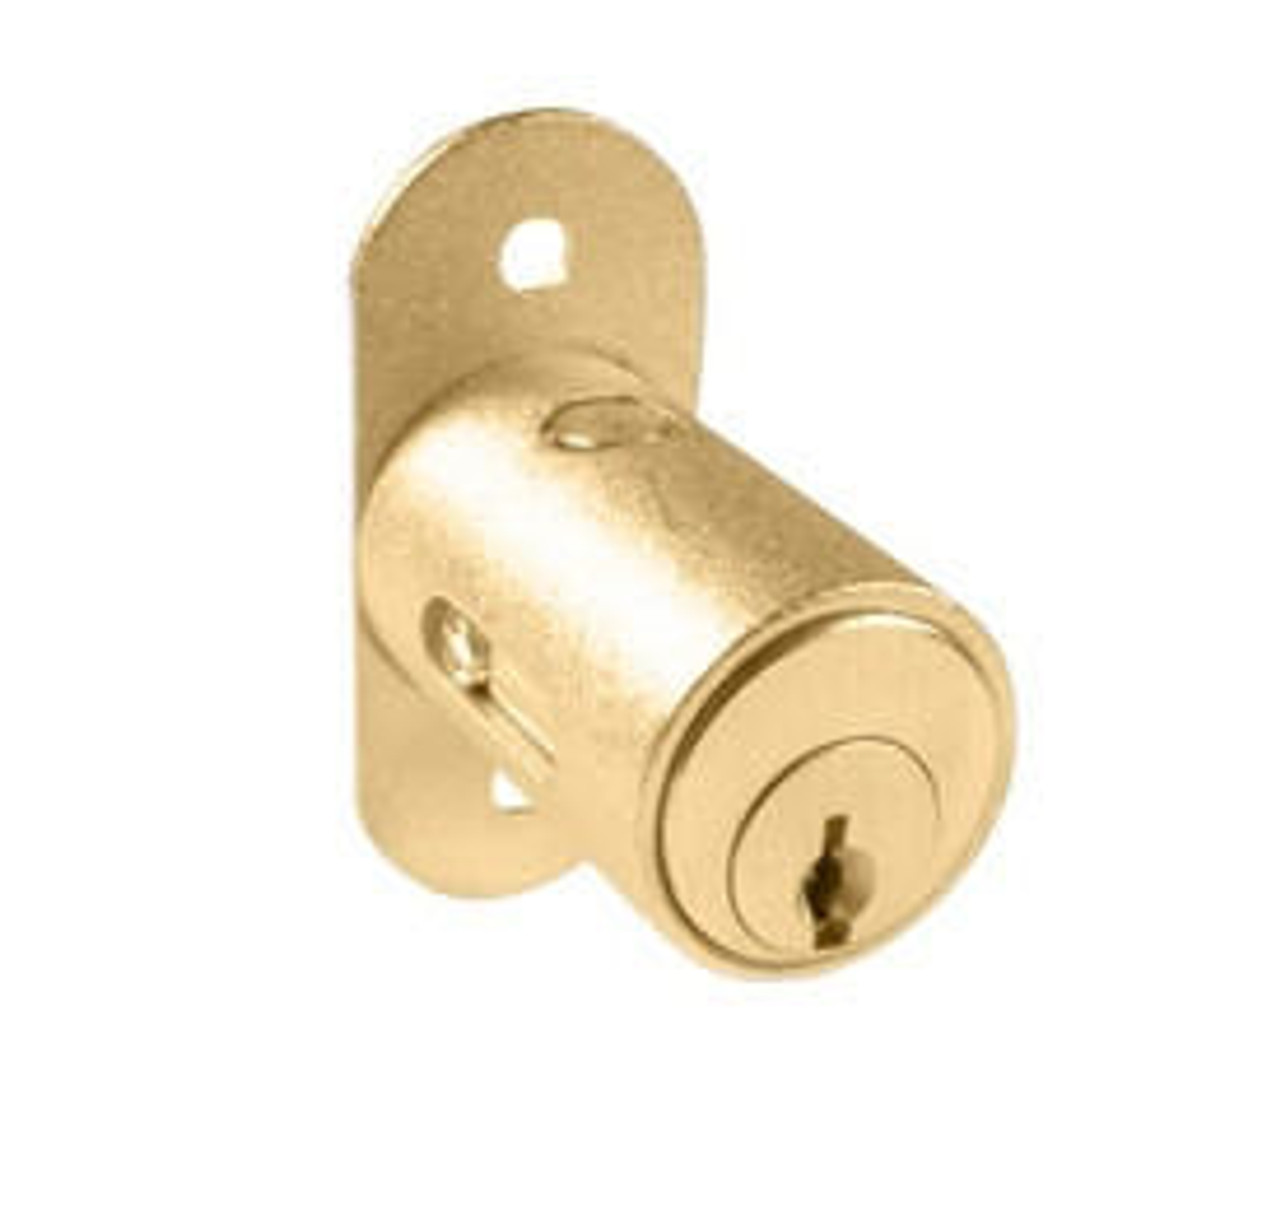 Compx Security Products Compx wood sliding door locks Pin Tumbler C8142 and C8143 